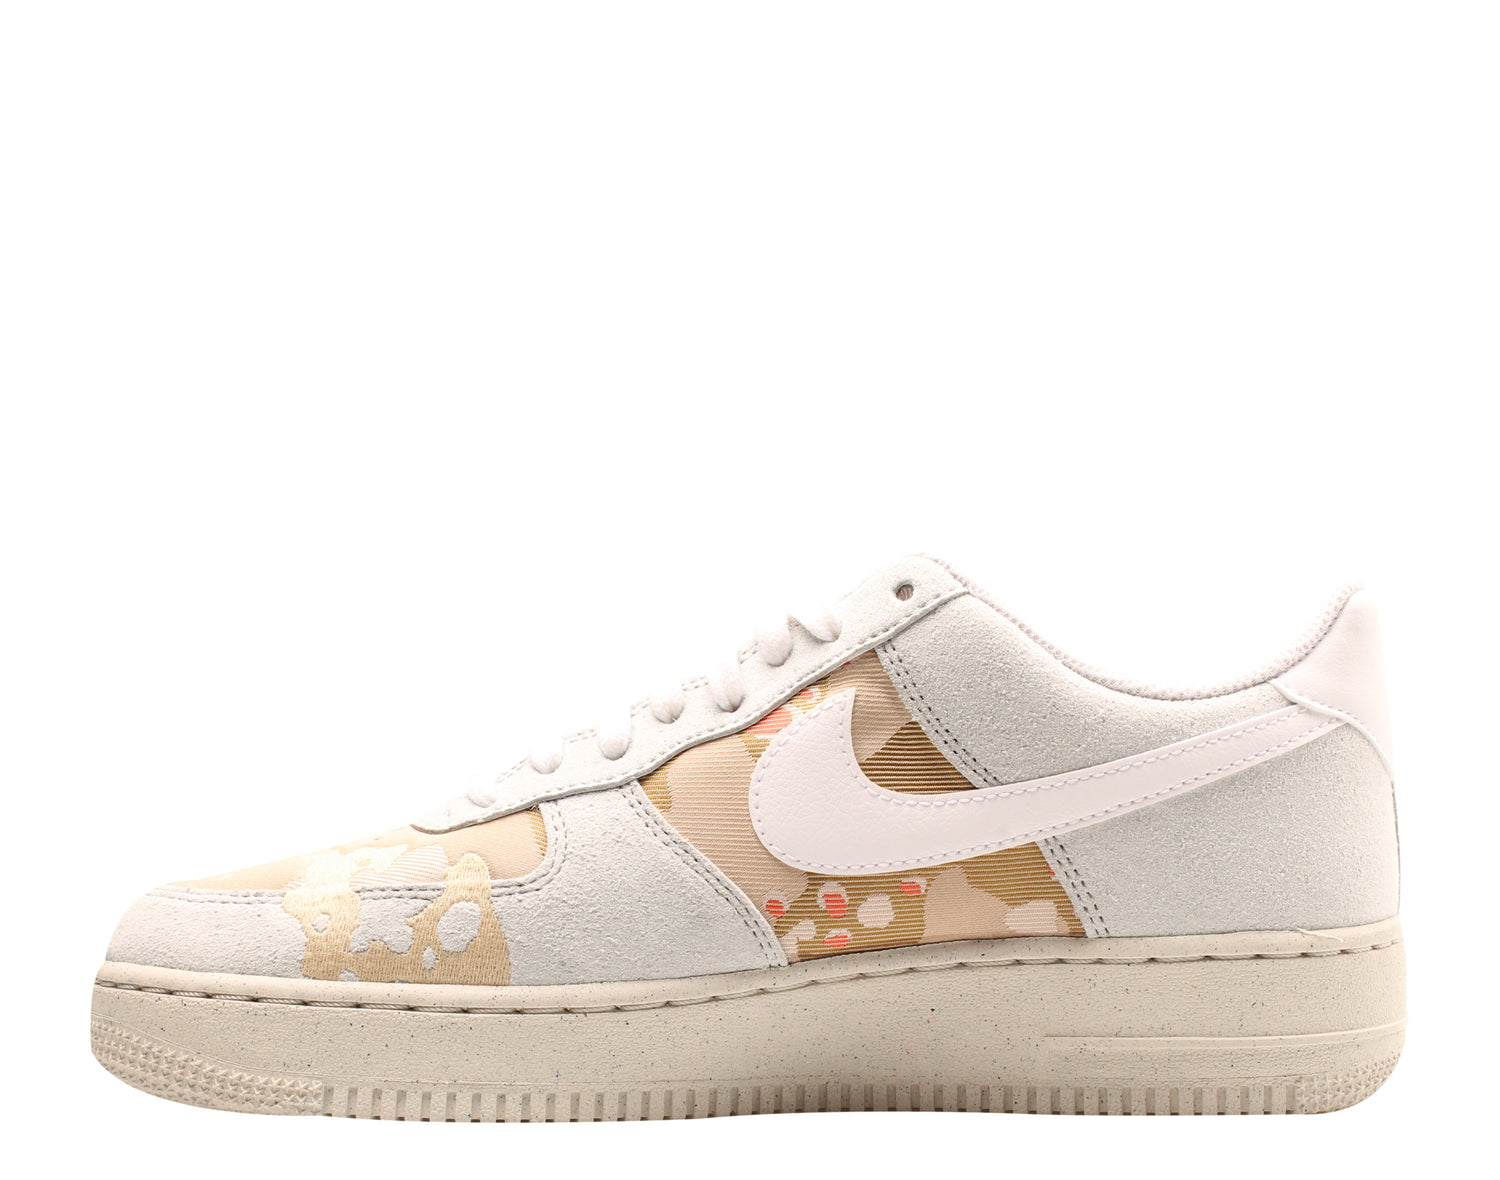 Nike Air Force 1 '07 LX Men's Basketball Shoes